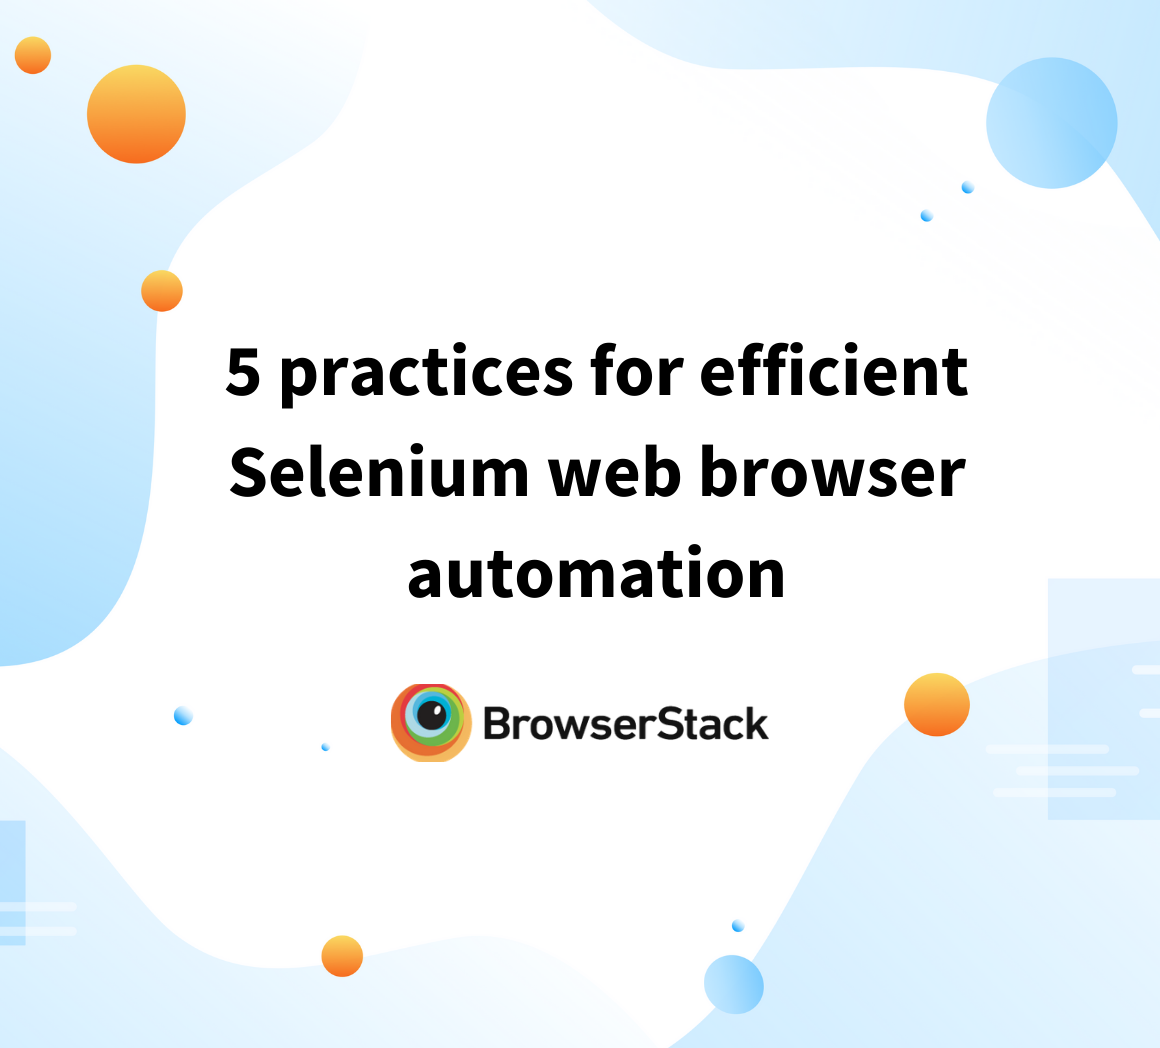 Best practices for Selenium web browser automation